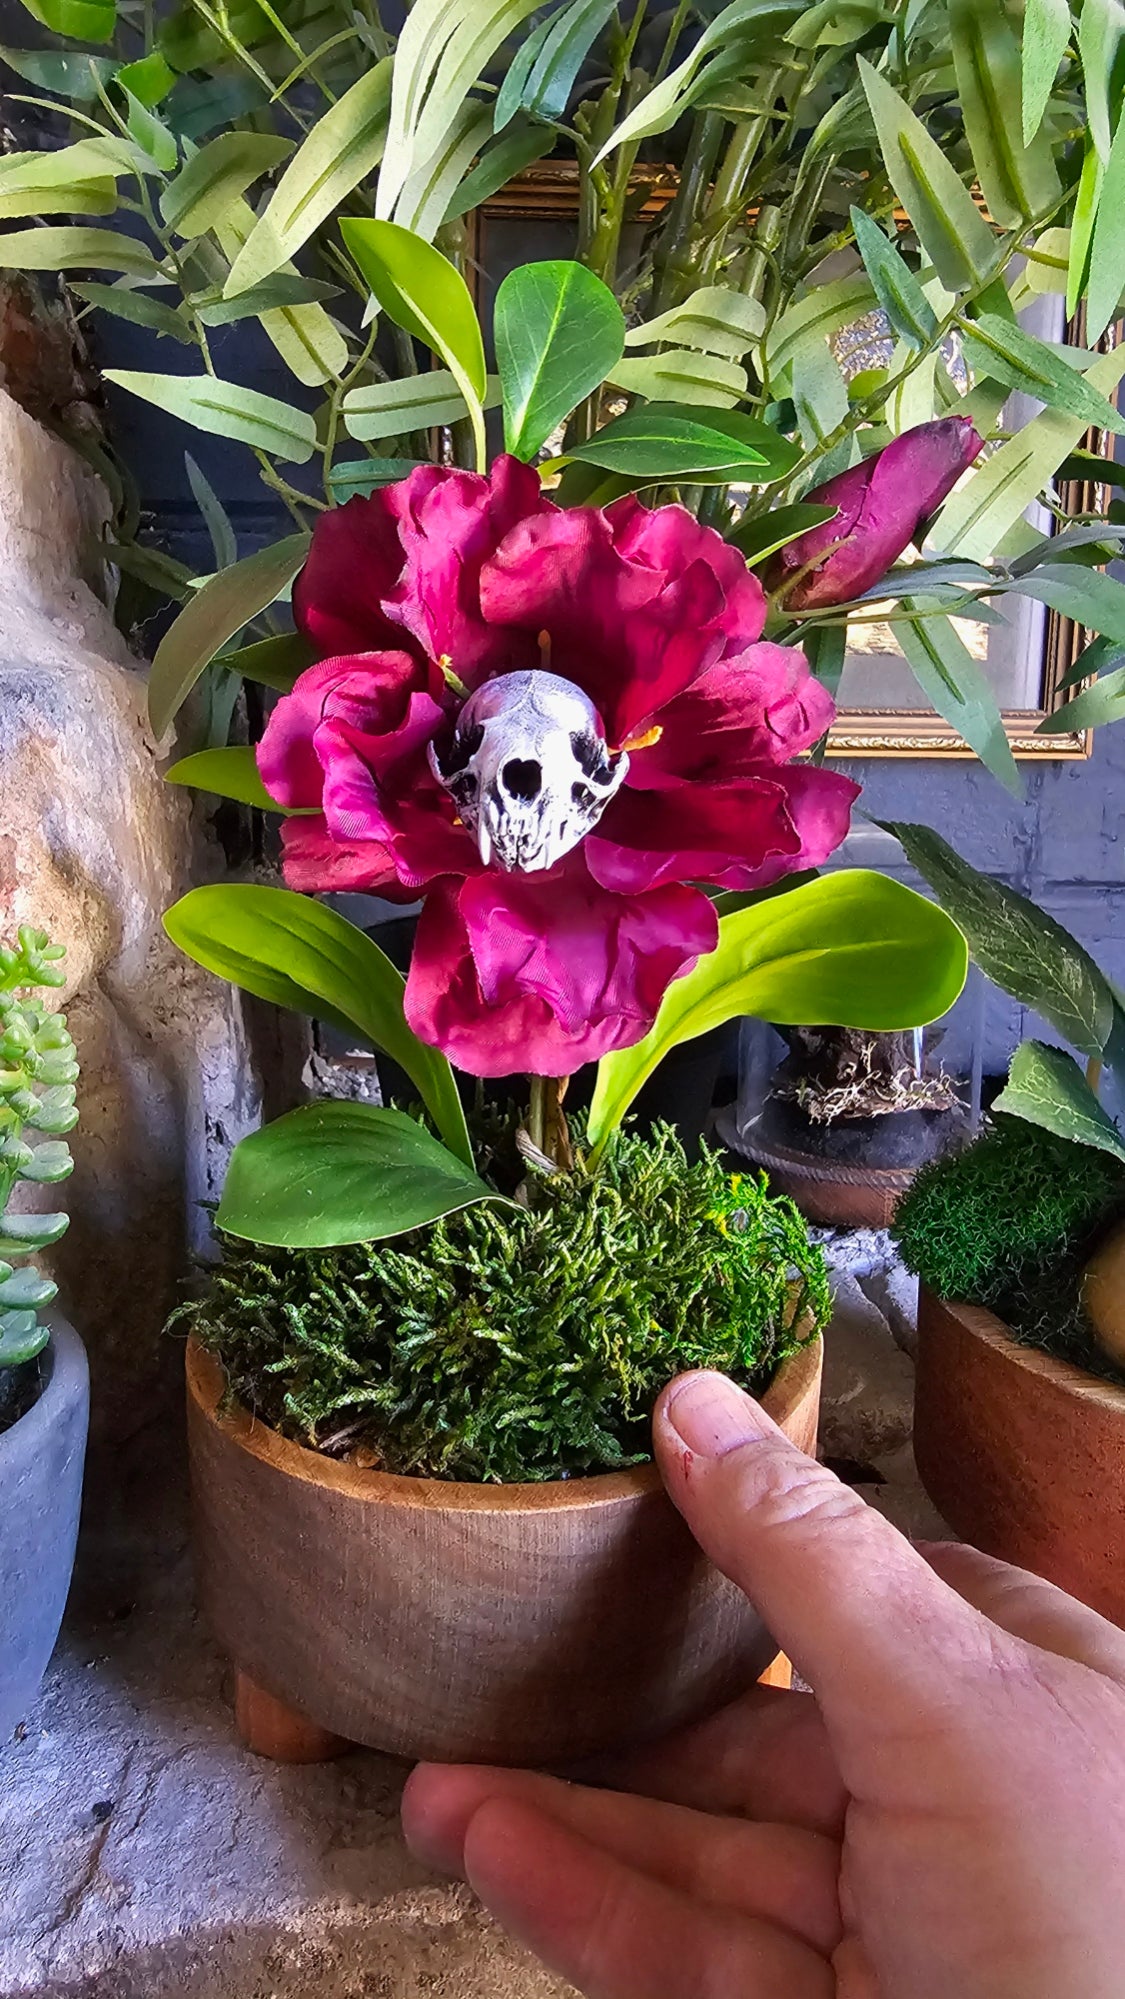 'Cleopatra' - Morticia Adams carnivorous plant with real skull